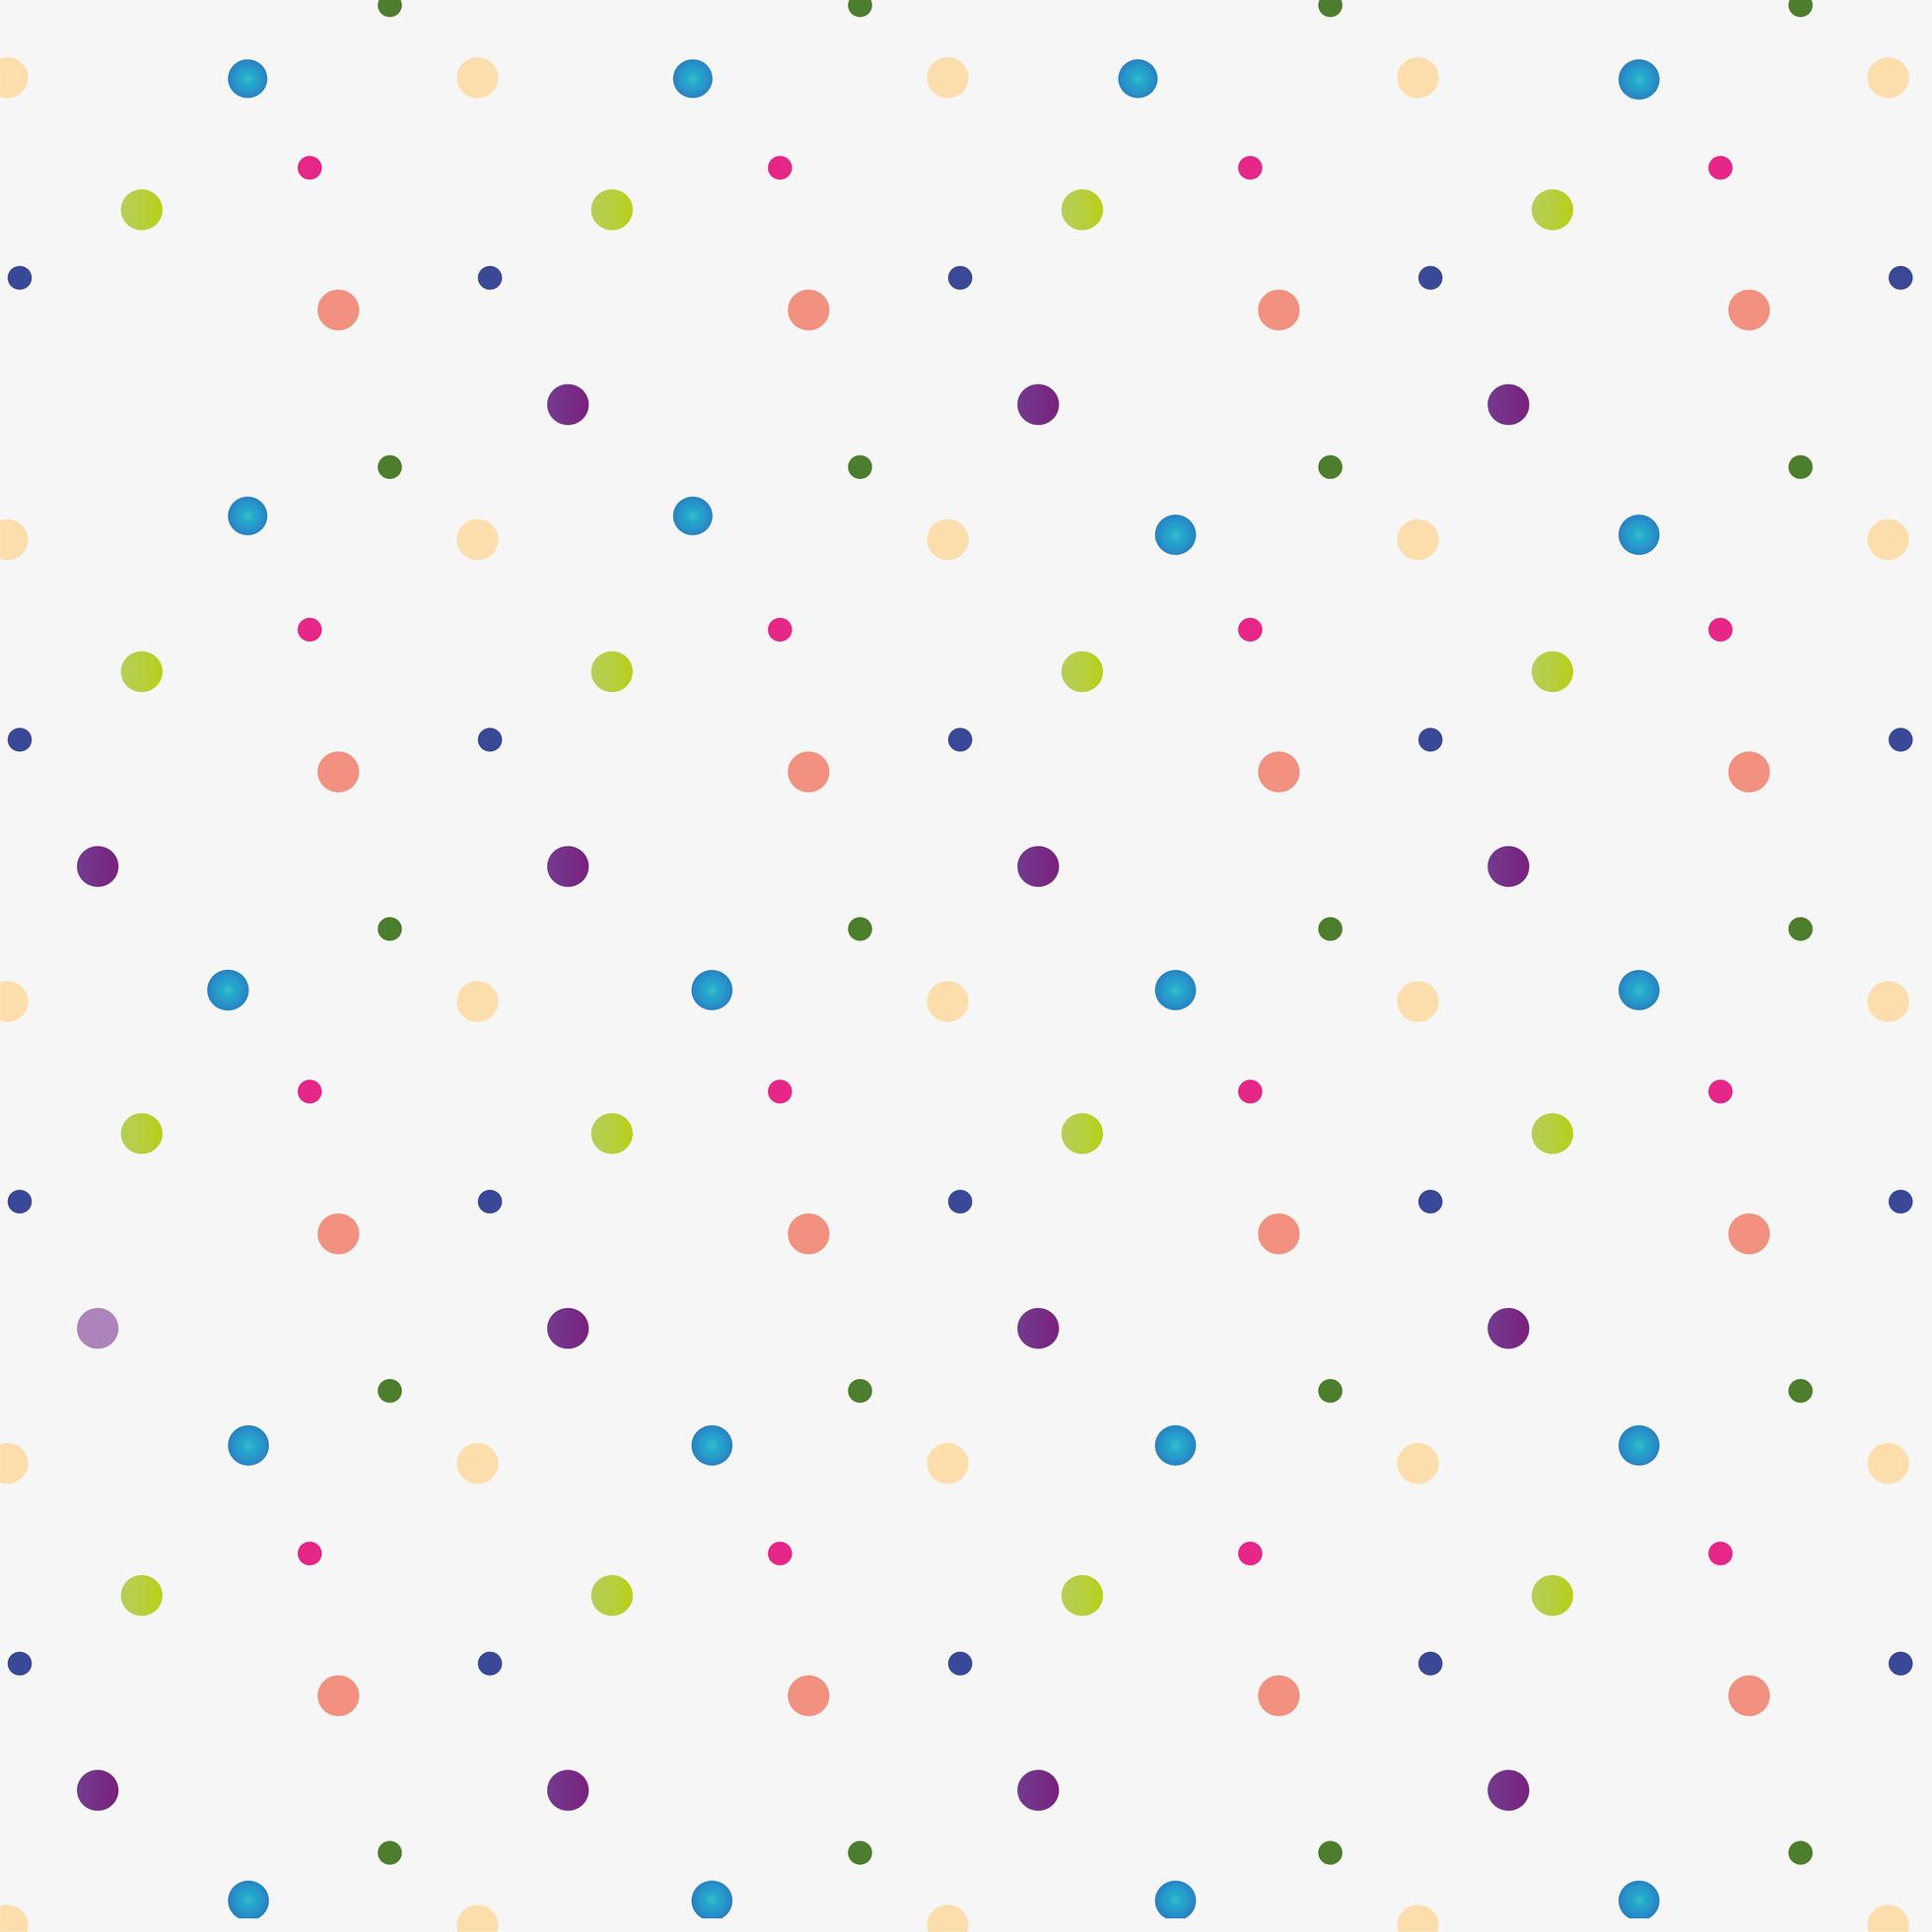 List 94+ Pictures Images Of Polka Dots Completed